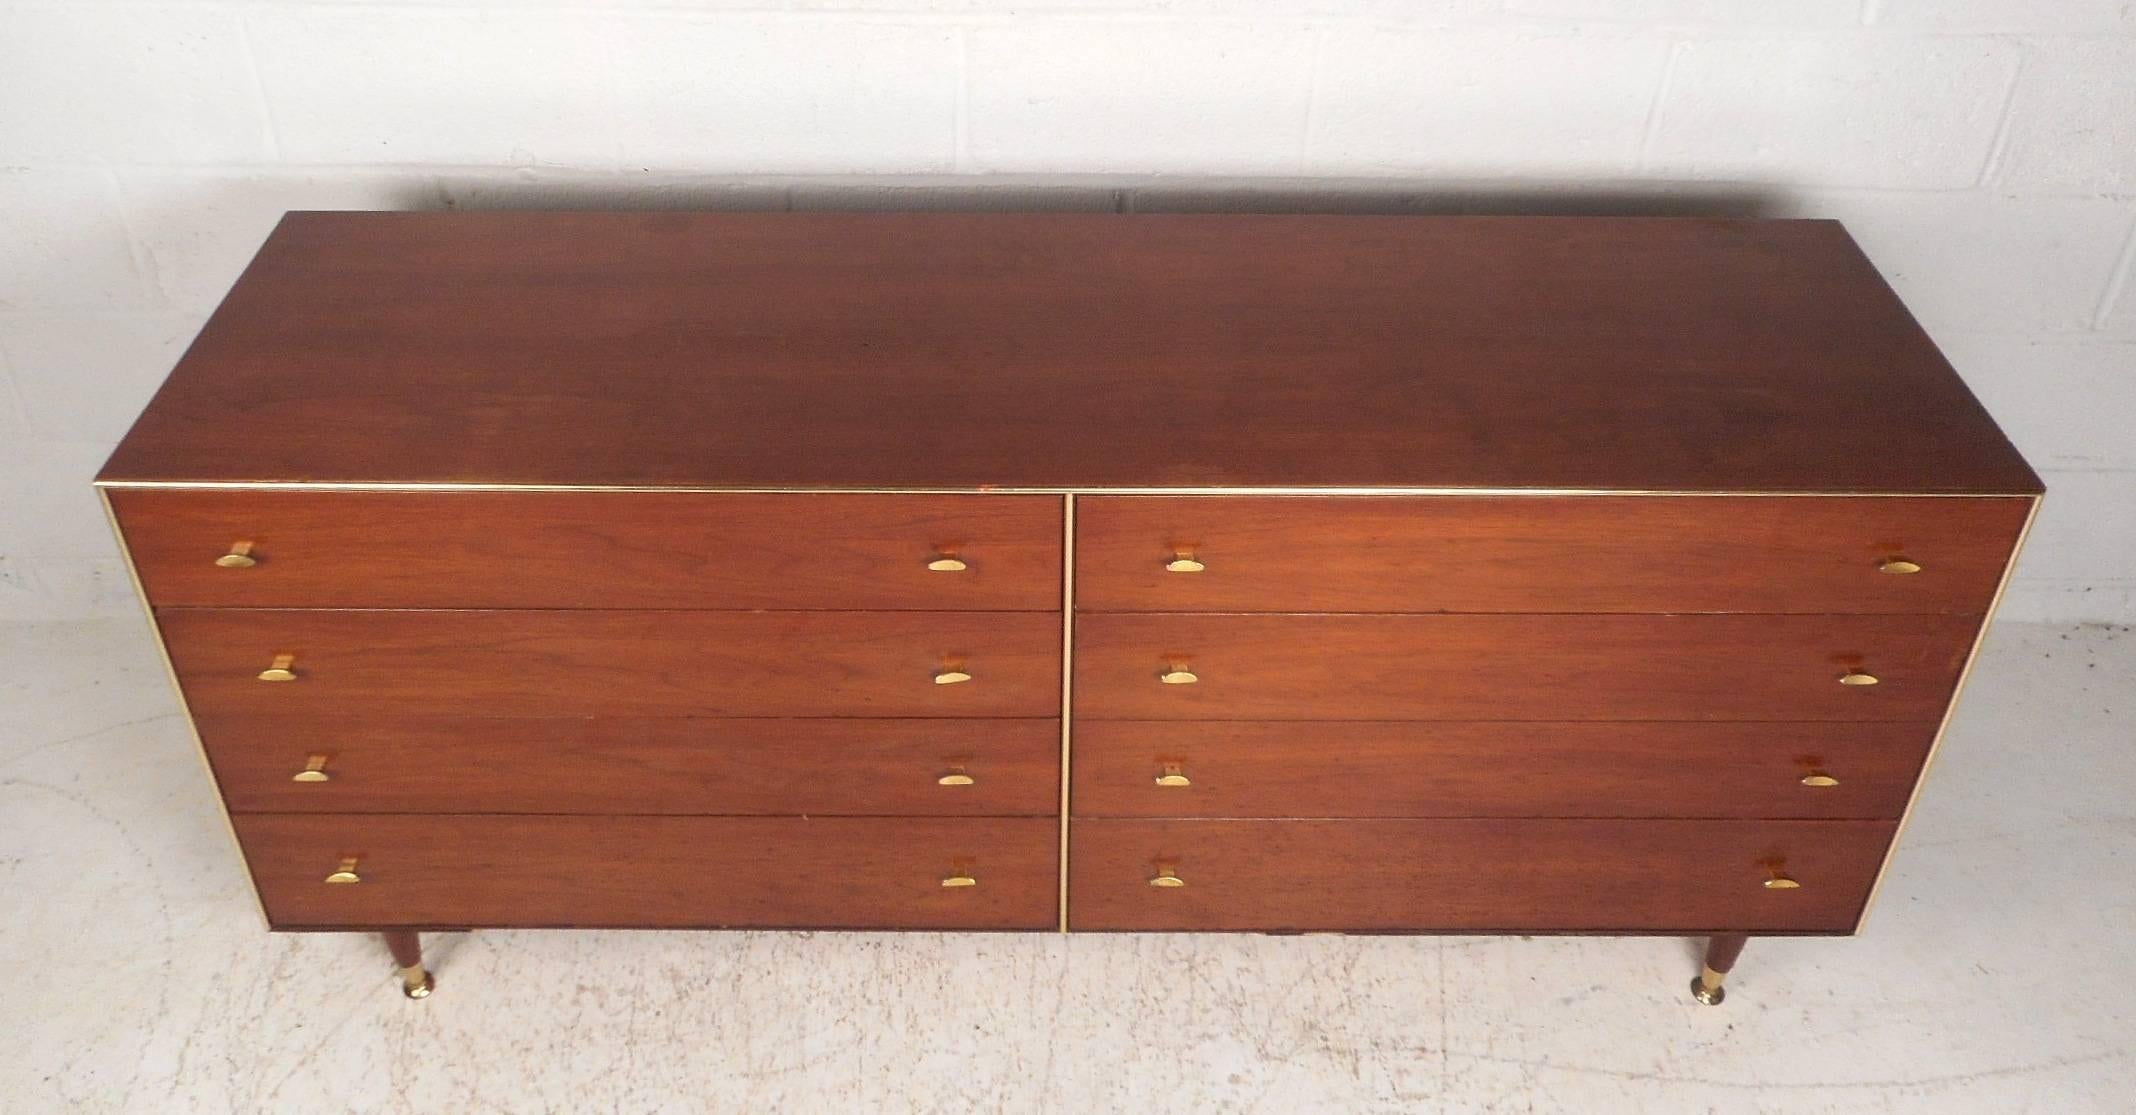 This stunning vintage modern dresser features eight large drawers with sculpted brass pulls on each. A unique design with brass trim running along the edges of the front and brass feet. Quality construction by R-Way with tapered legs and a beautiful